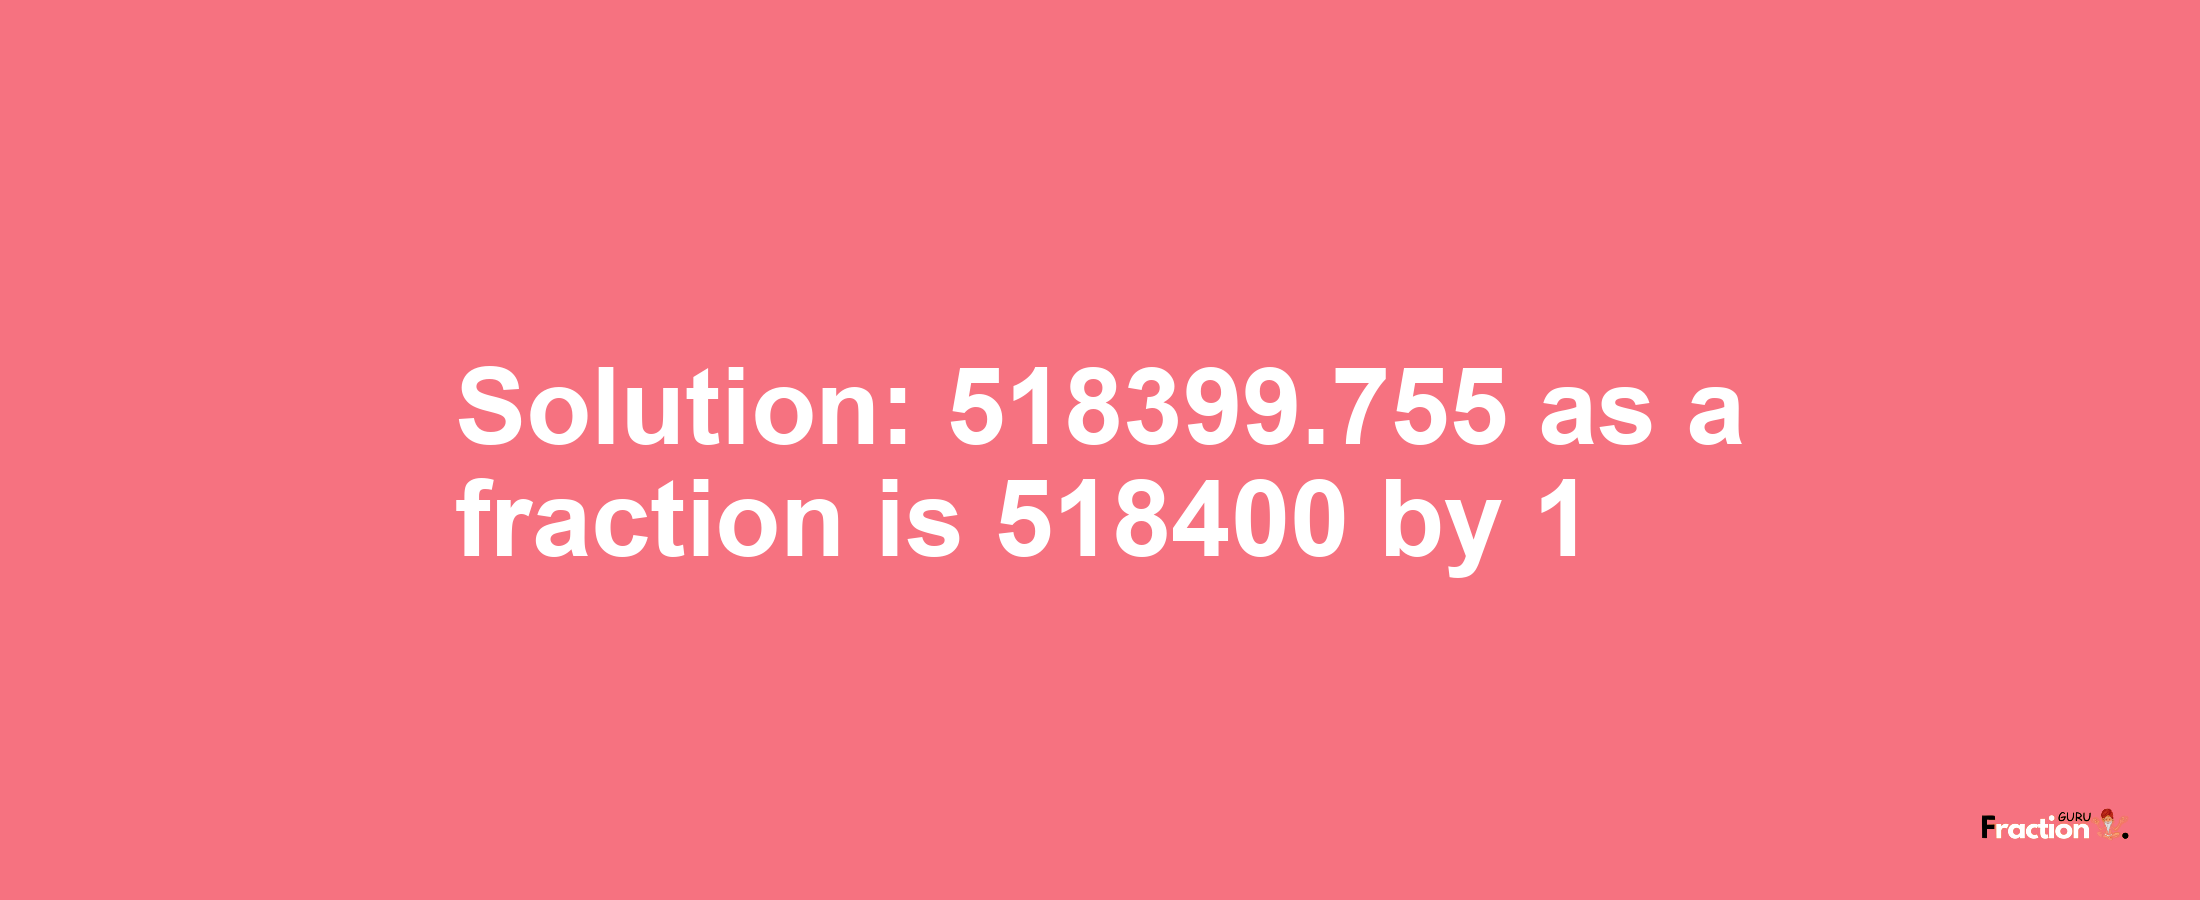 Solution:518399.755 as a fraction is 518400/1